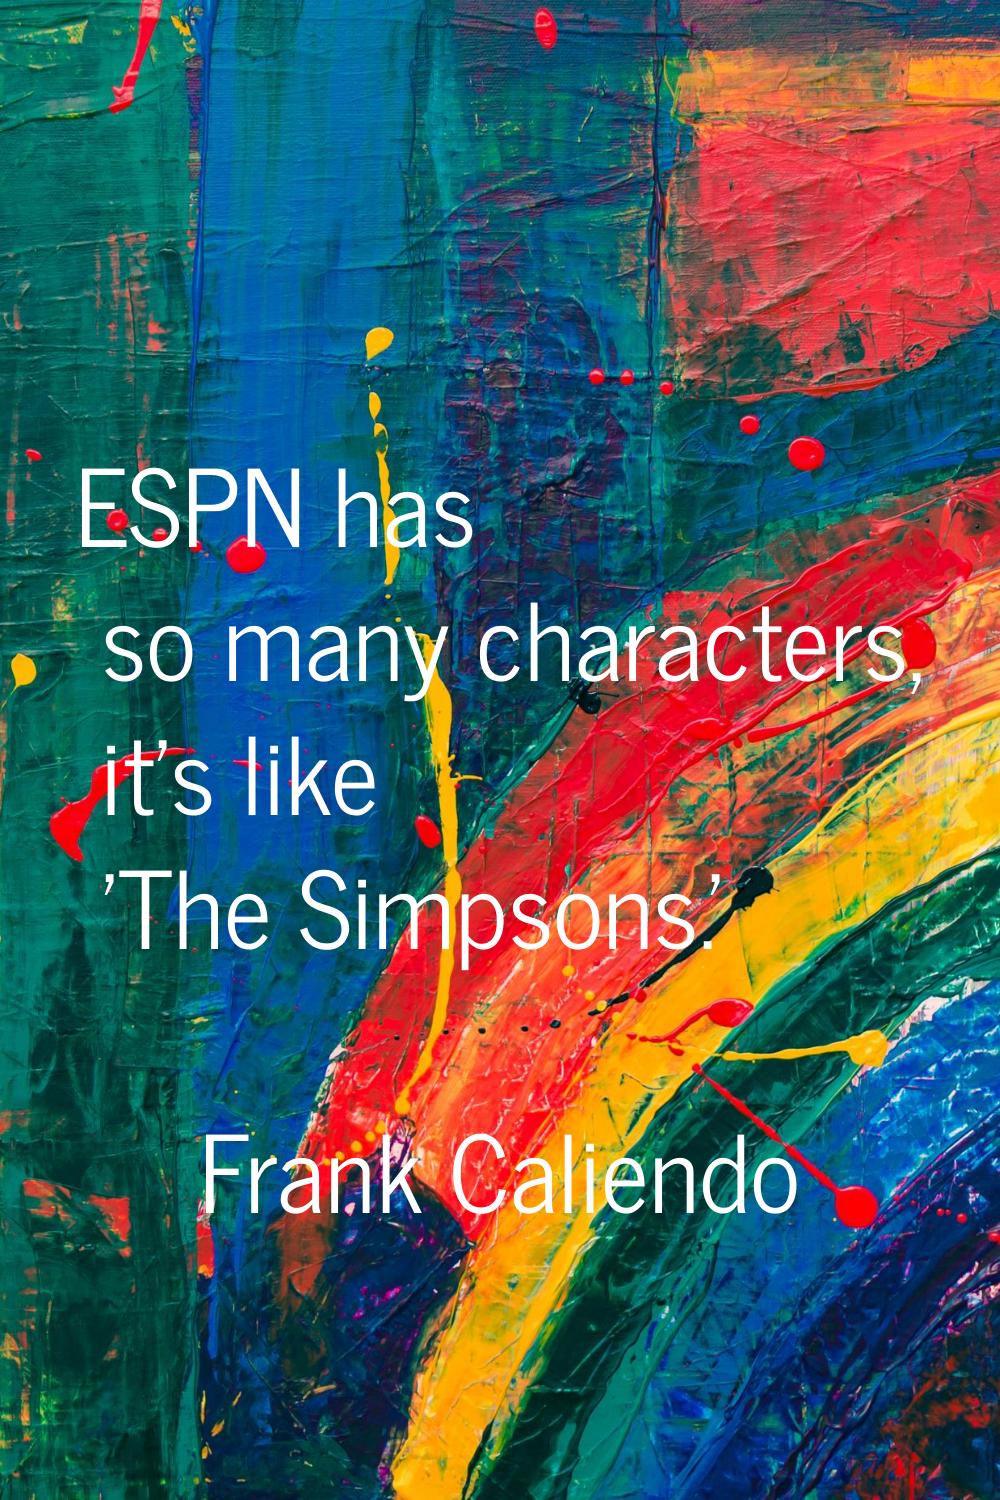 ESPN has so many characters, it's like 'The Simpsons.'